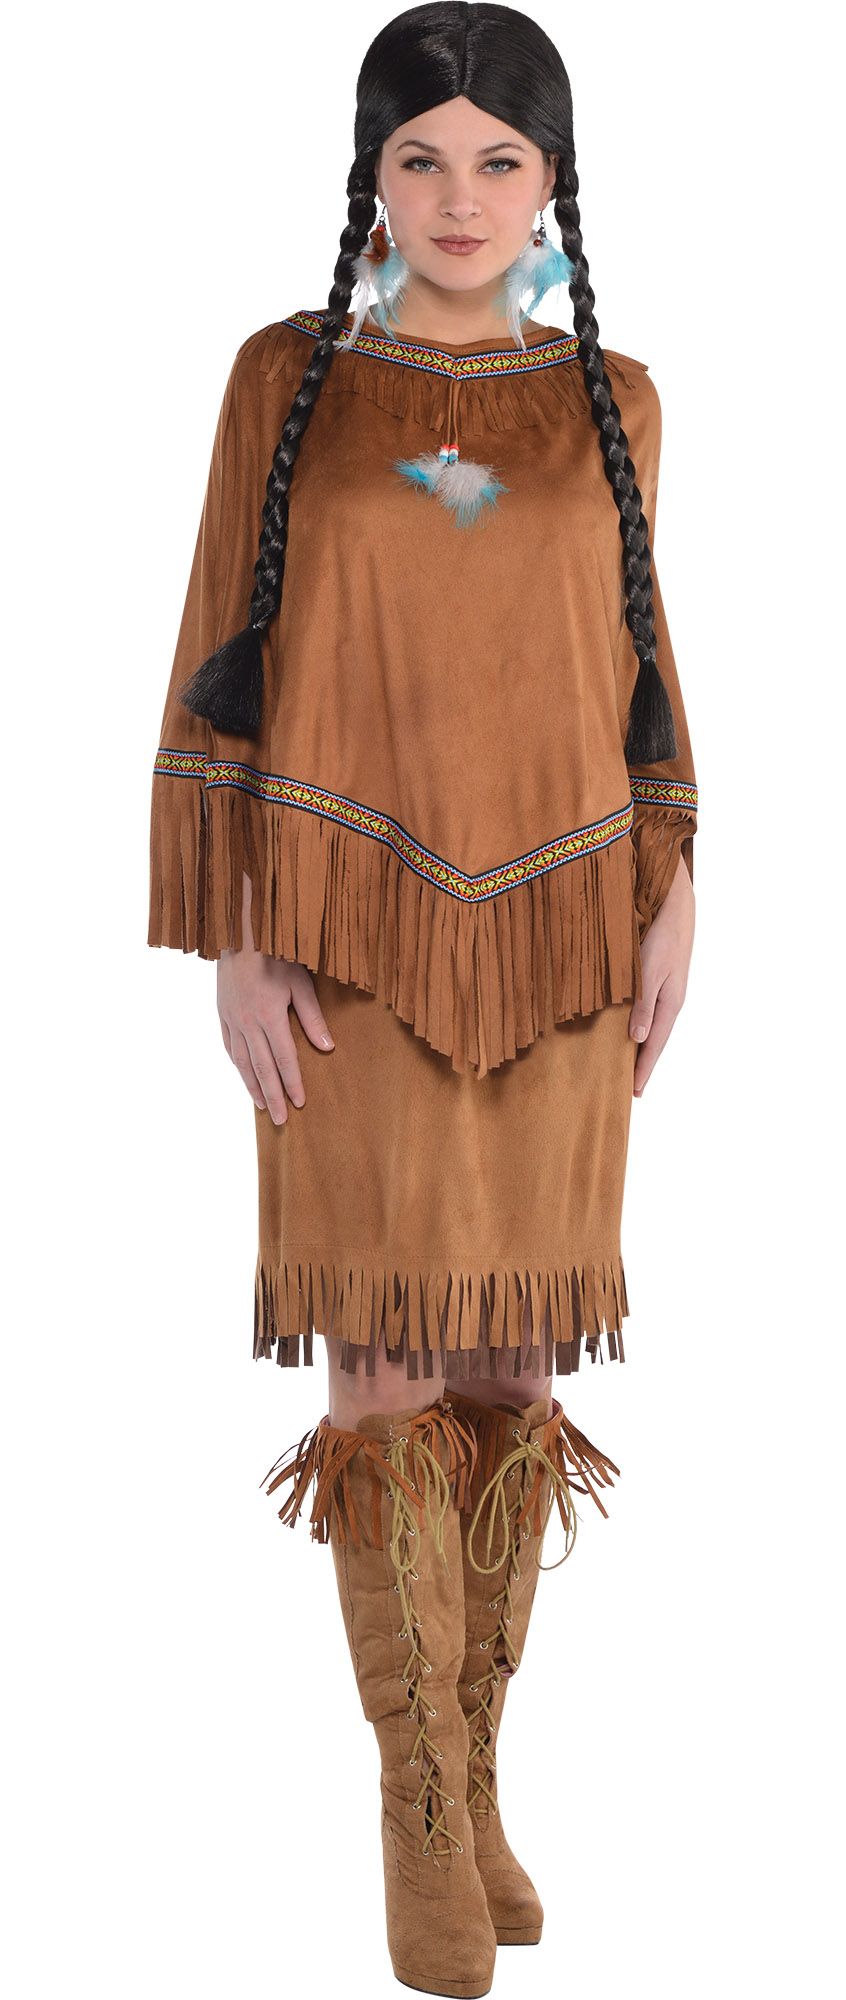 Create Your Own Women's Native American Costume Accessories - Party City